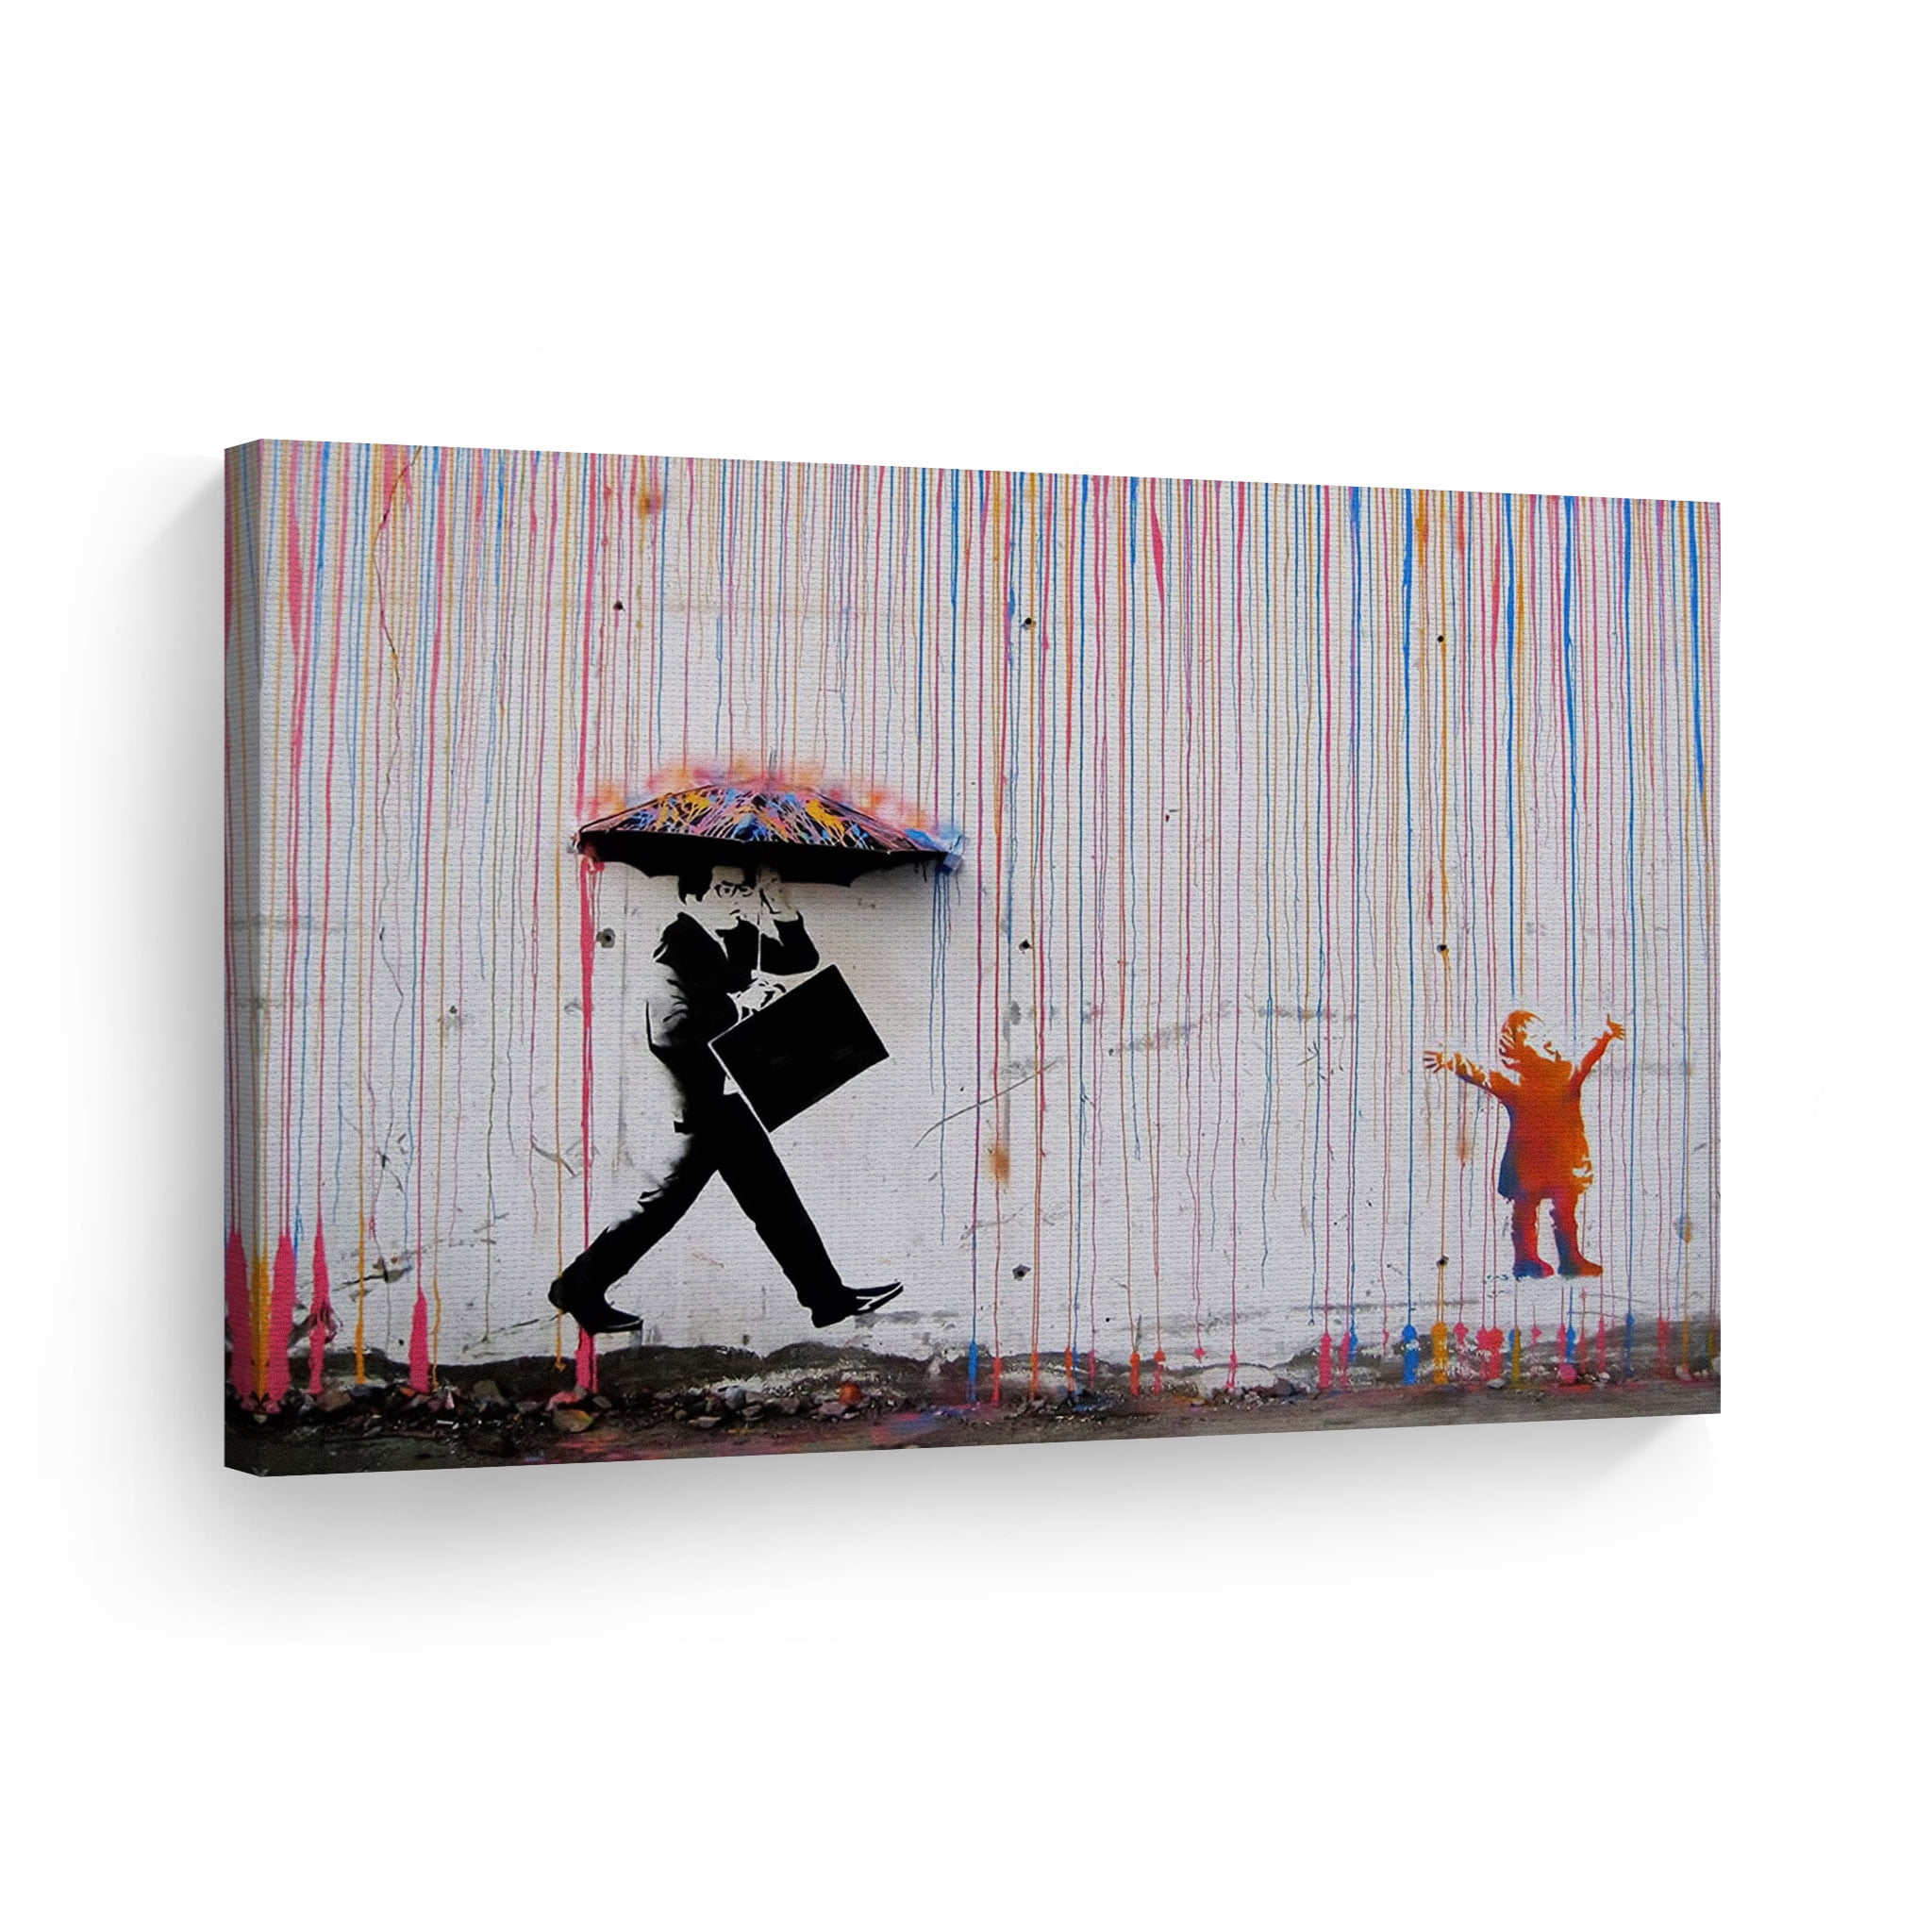 QUEENS GUARD SOLDIER  BY BANKSY BW PICTURE WALL ART HOME DECORATION 